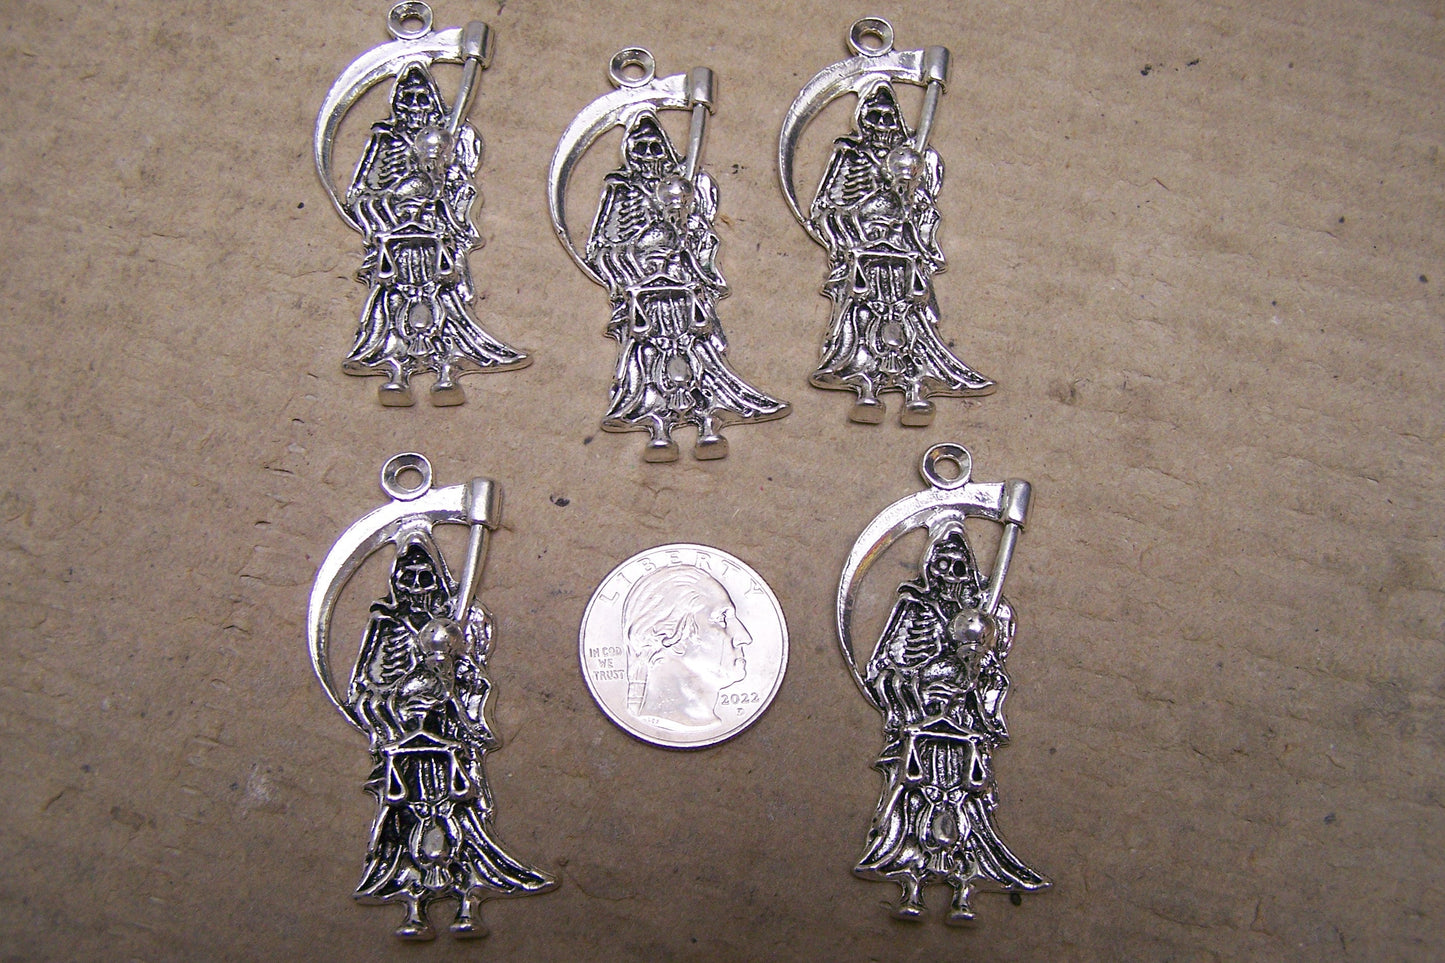 Lot of 5 Santa Muerte Metal Charms for Necklaces/Jewelry #1